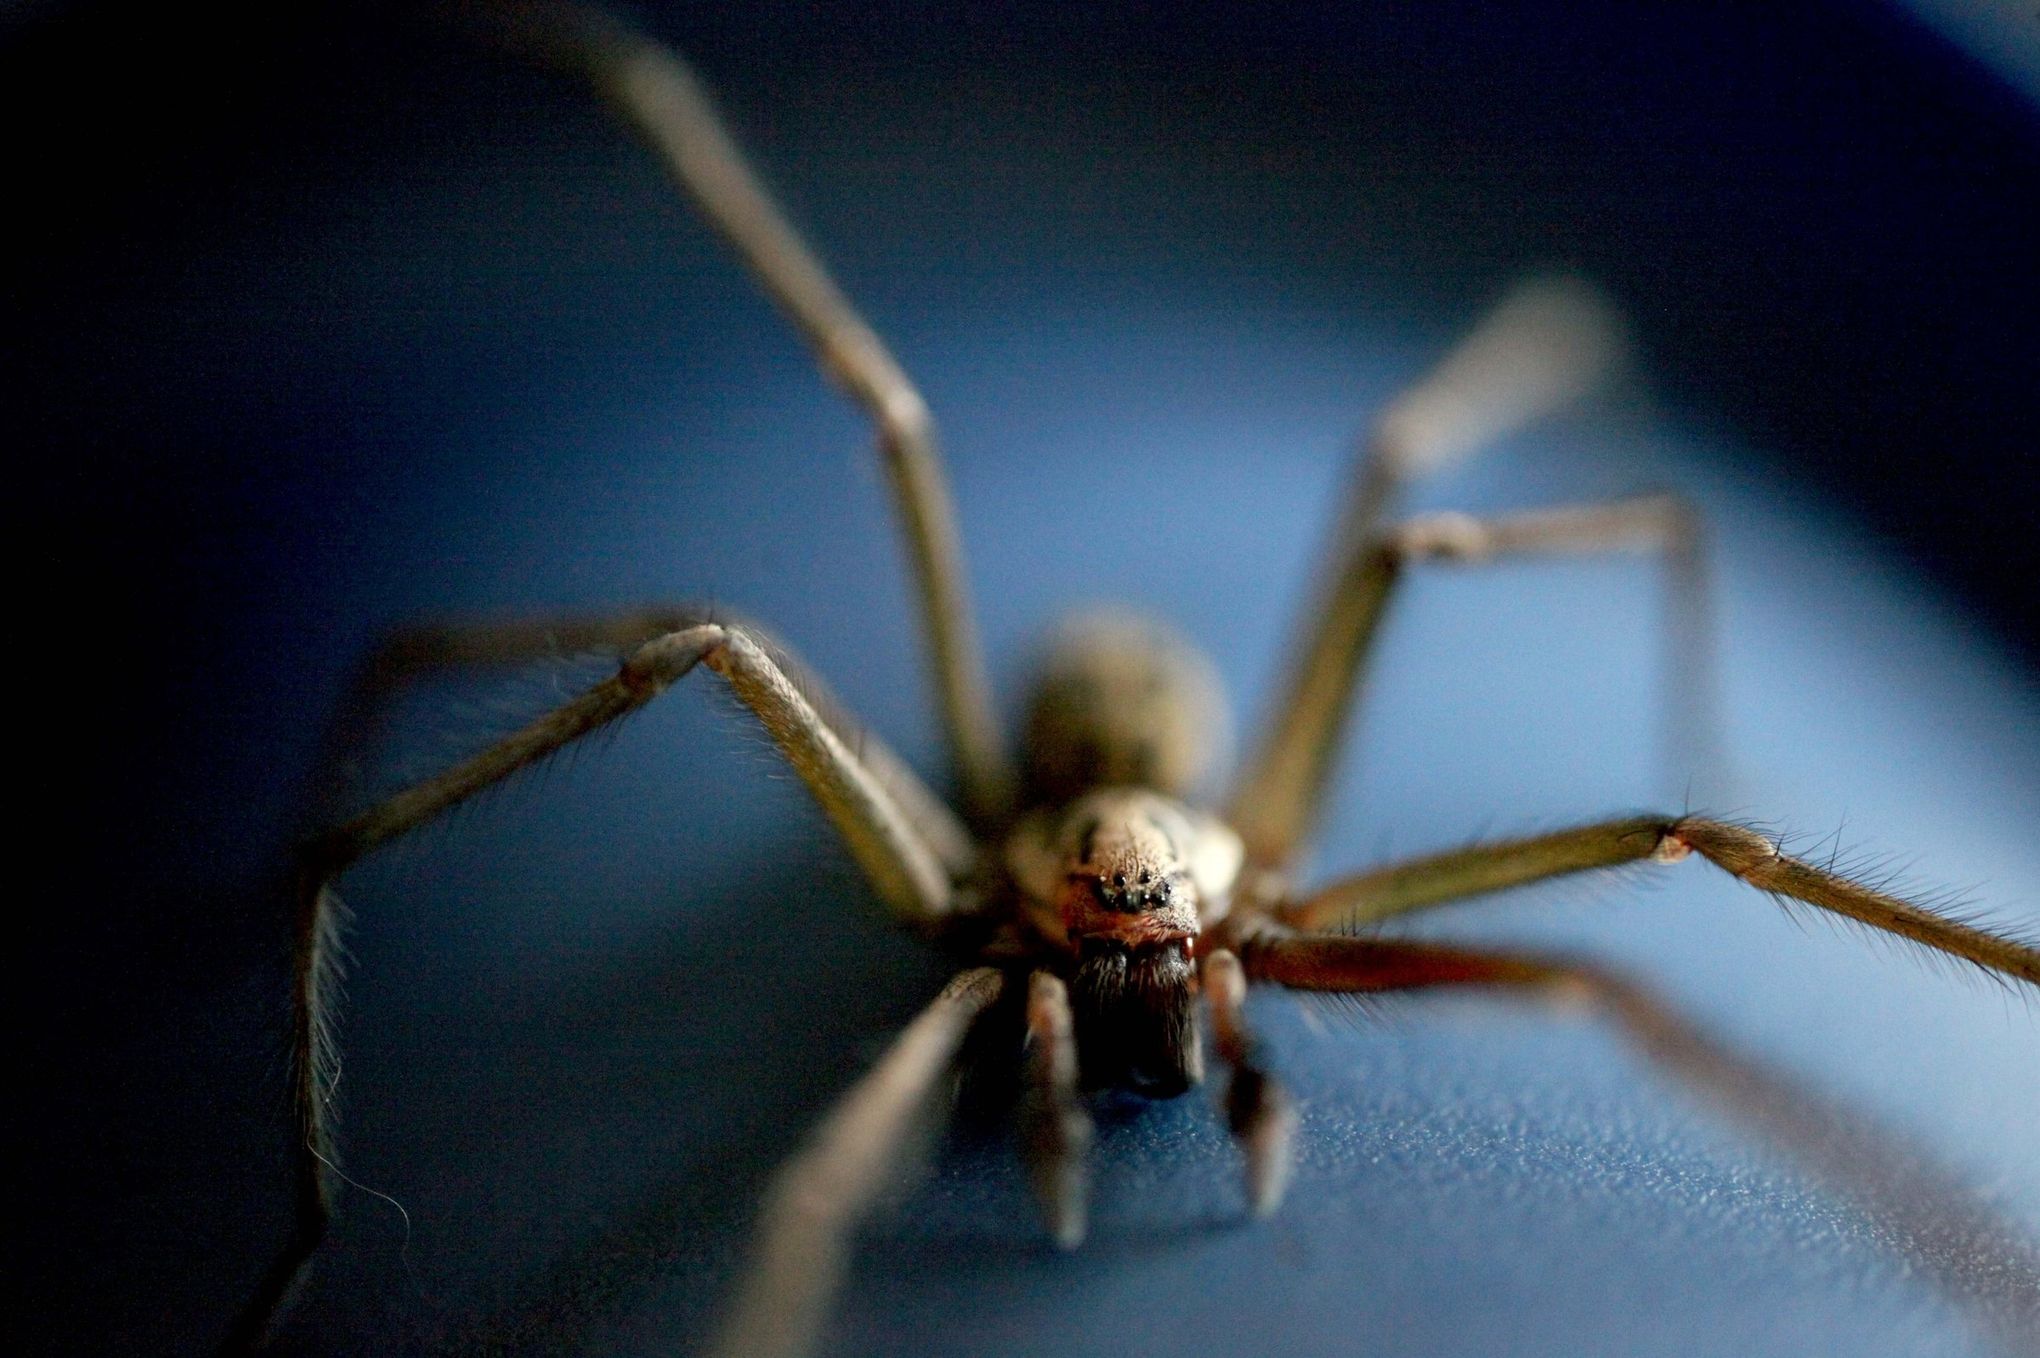 Mating season means giant spiders are on the move in Seattle - Axios Seattle